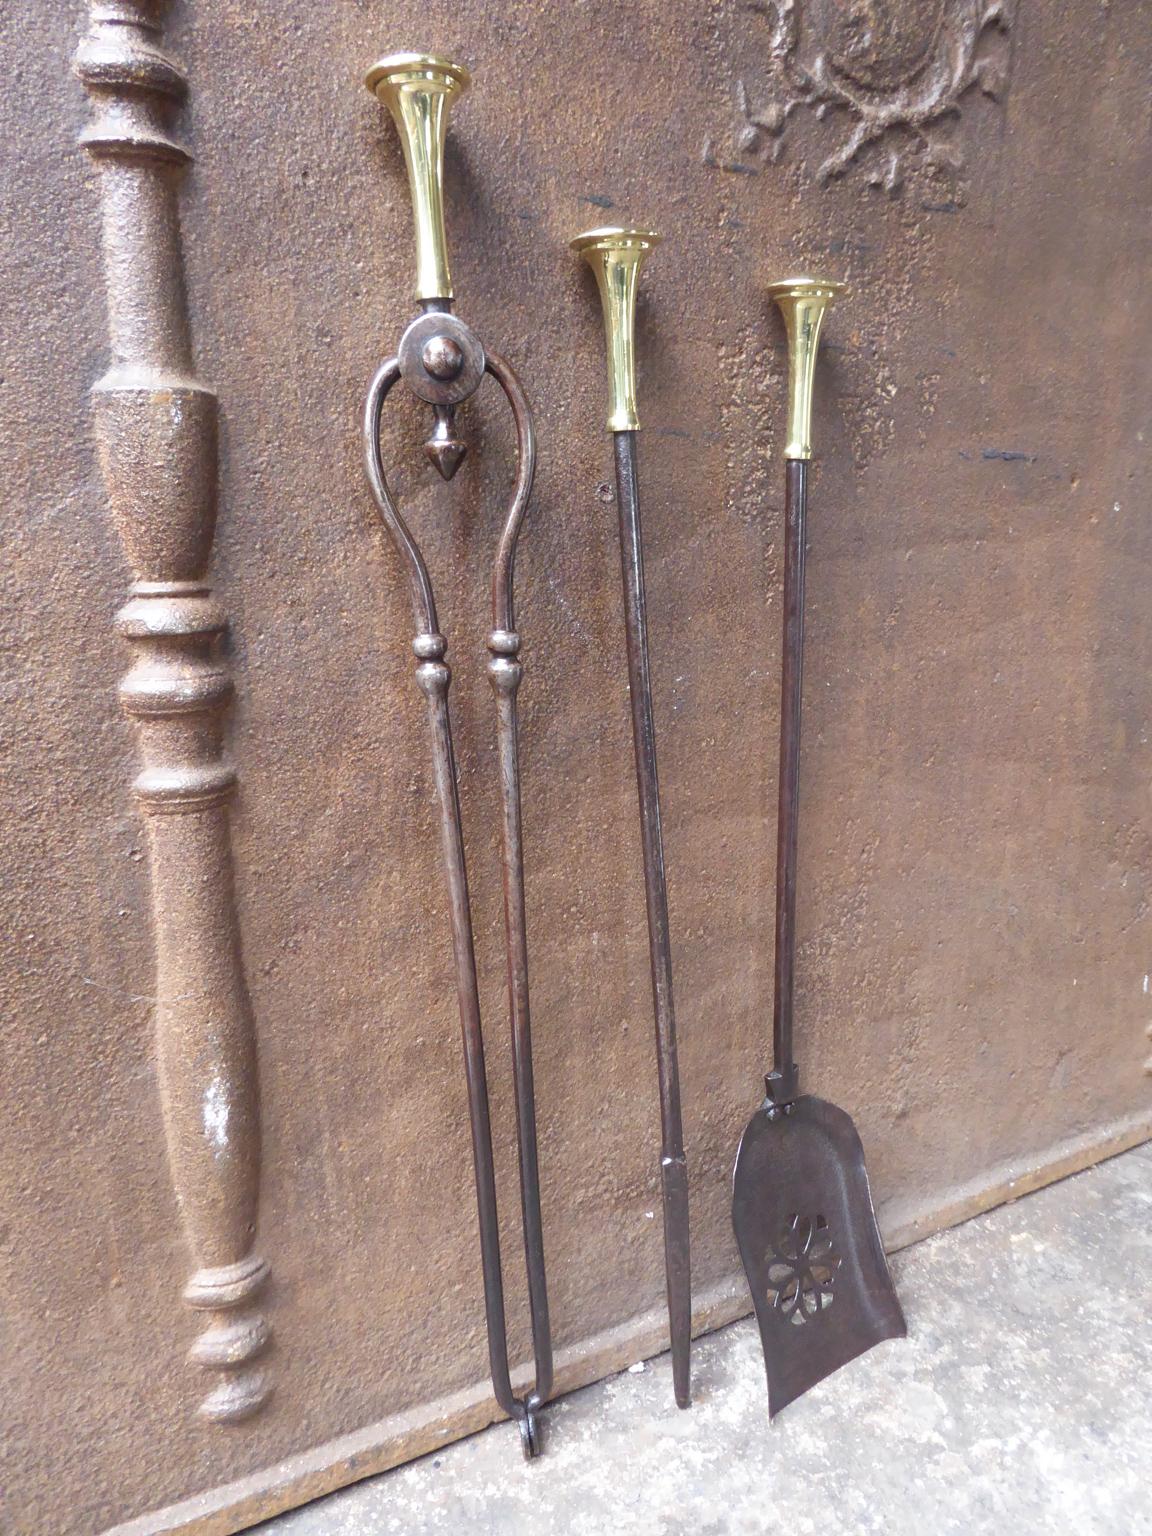 19th century English Victorian set of three tools made of wrought iron with and polished brass handles. The set is in a good condition and is fully functional.







   